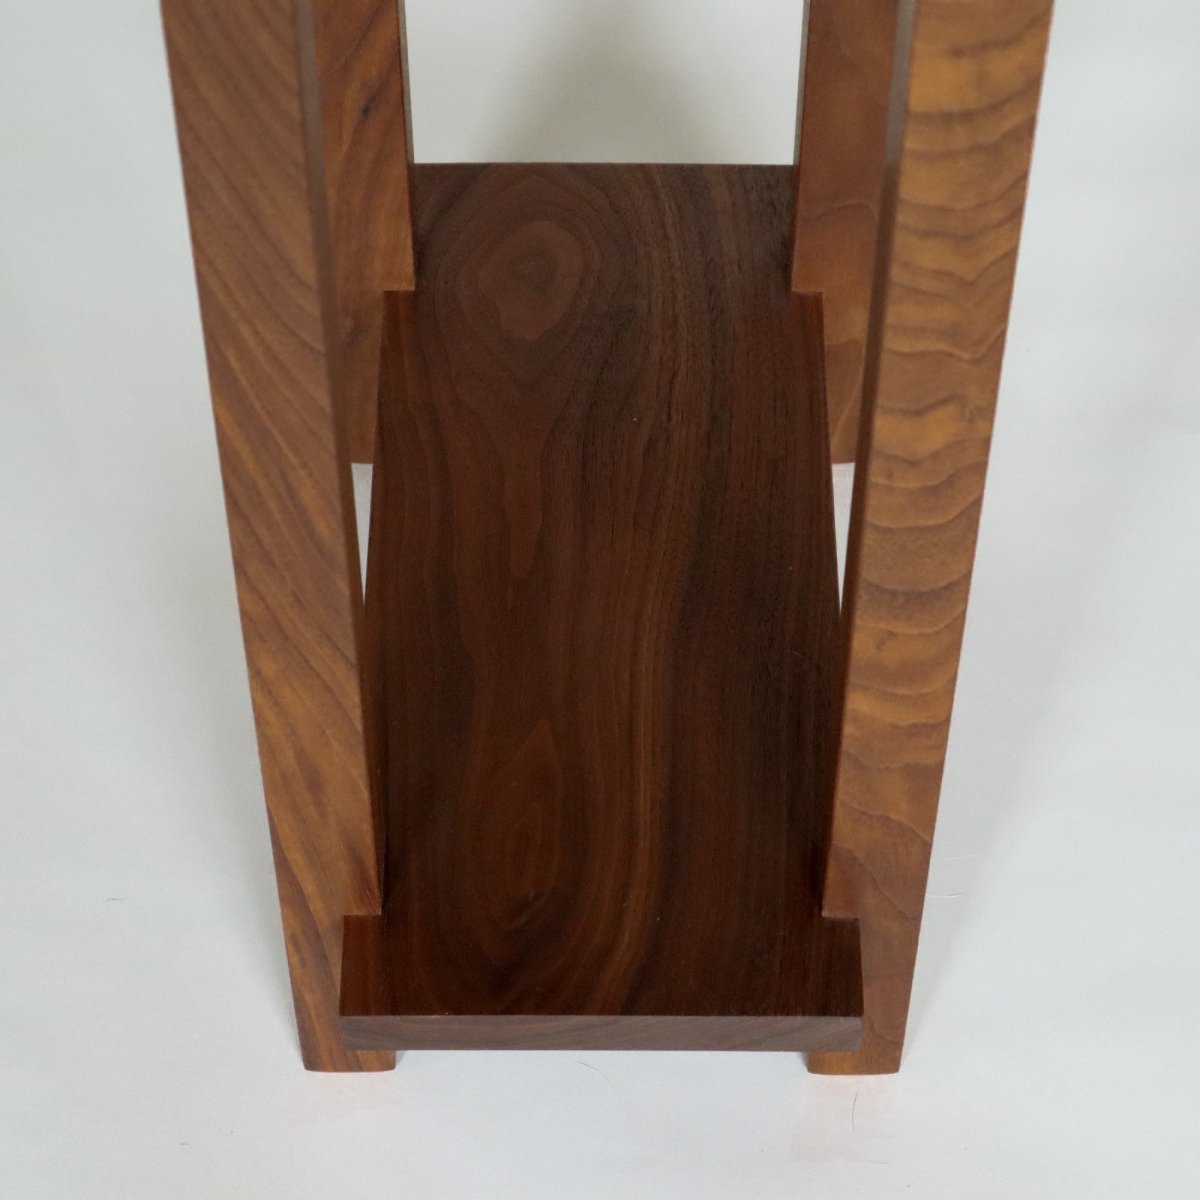 hand-crafted fine furniture design by Mokuzai Furniture - walnut end table with shelf